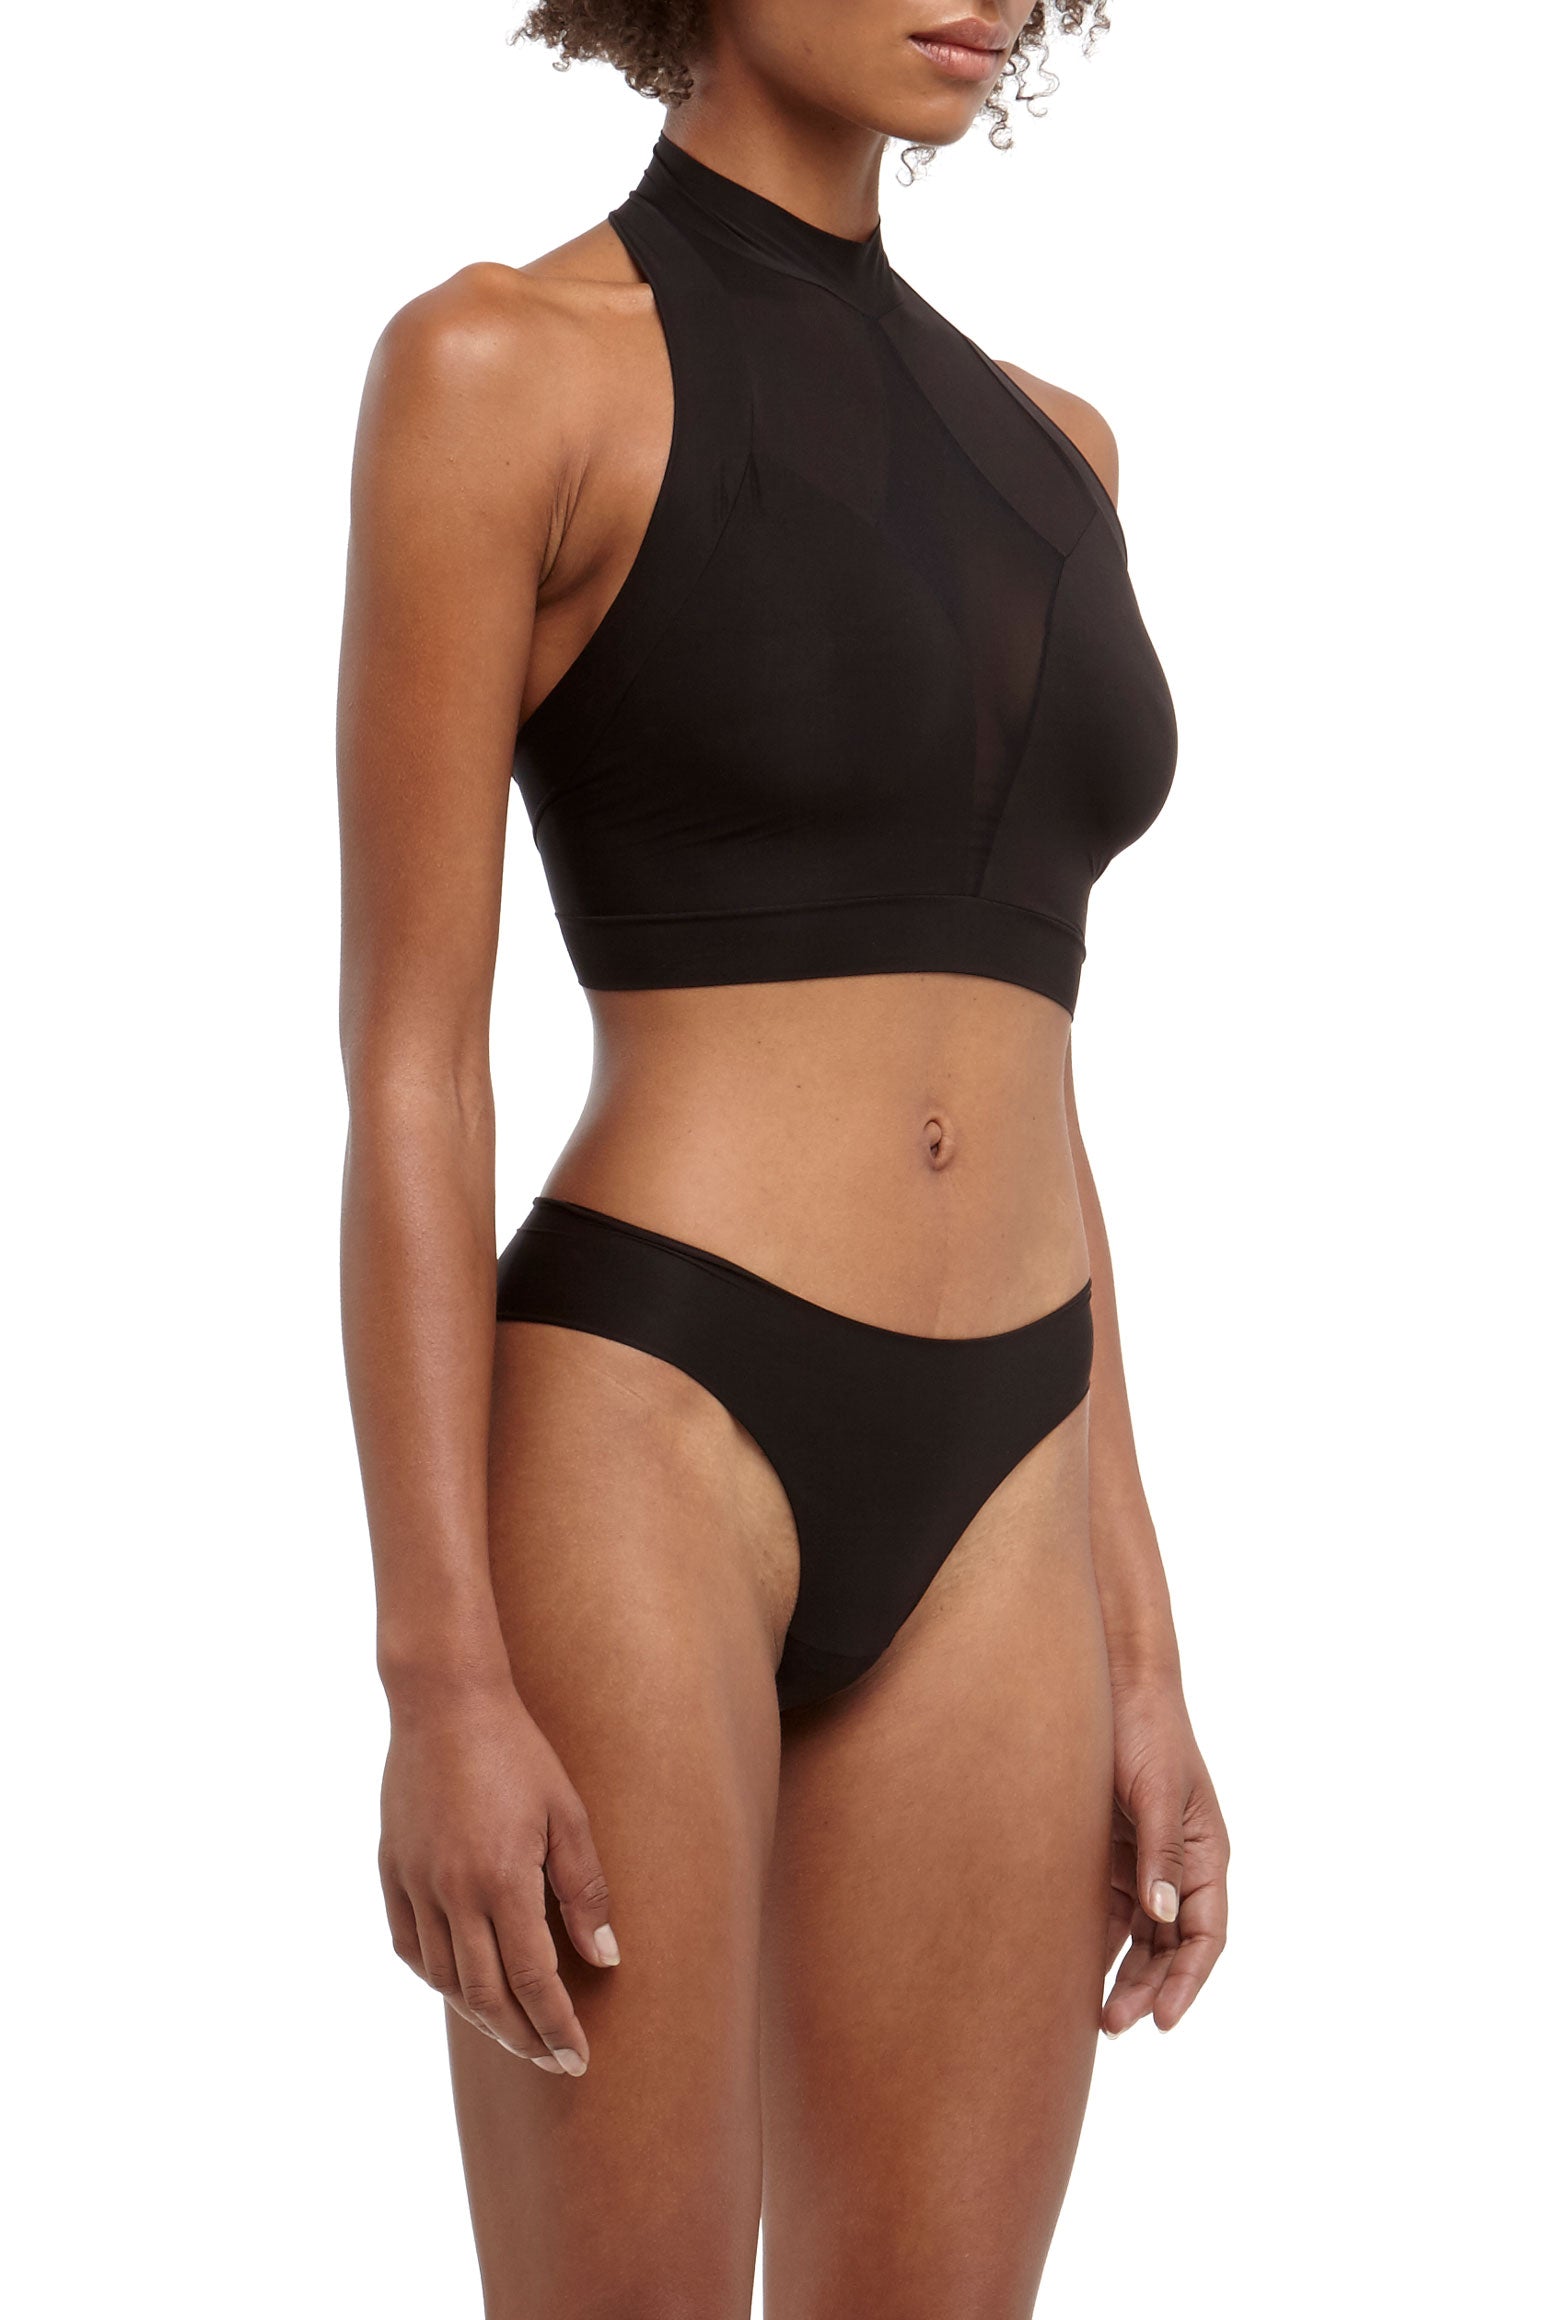 DSTM Brazilian thong and Axon halter top - side